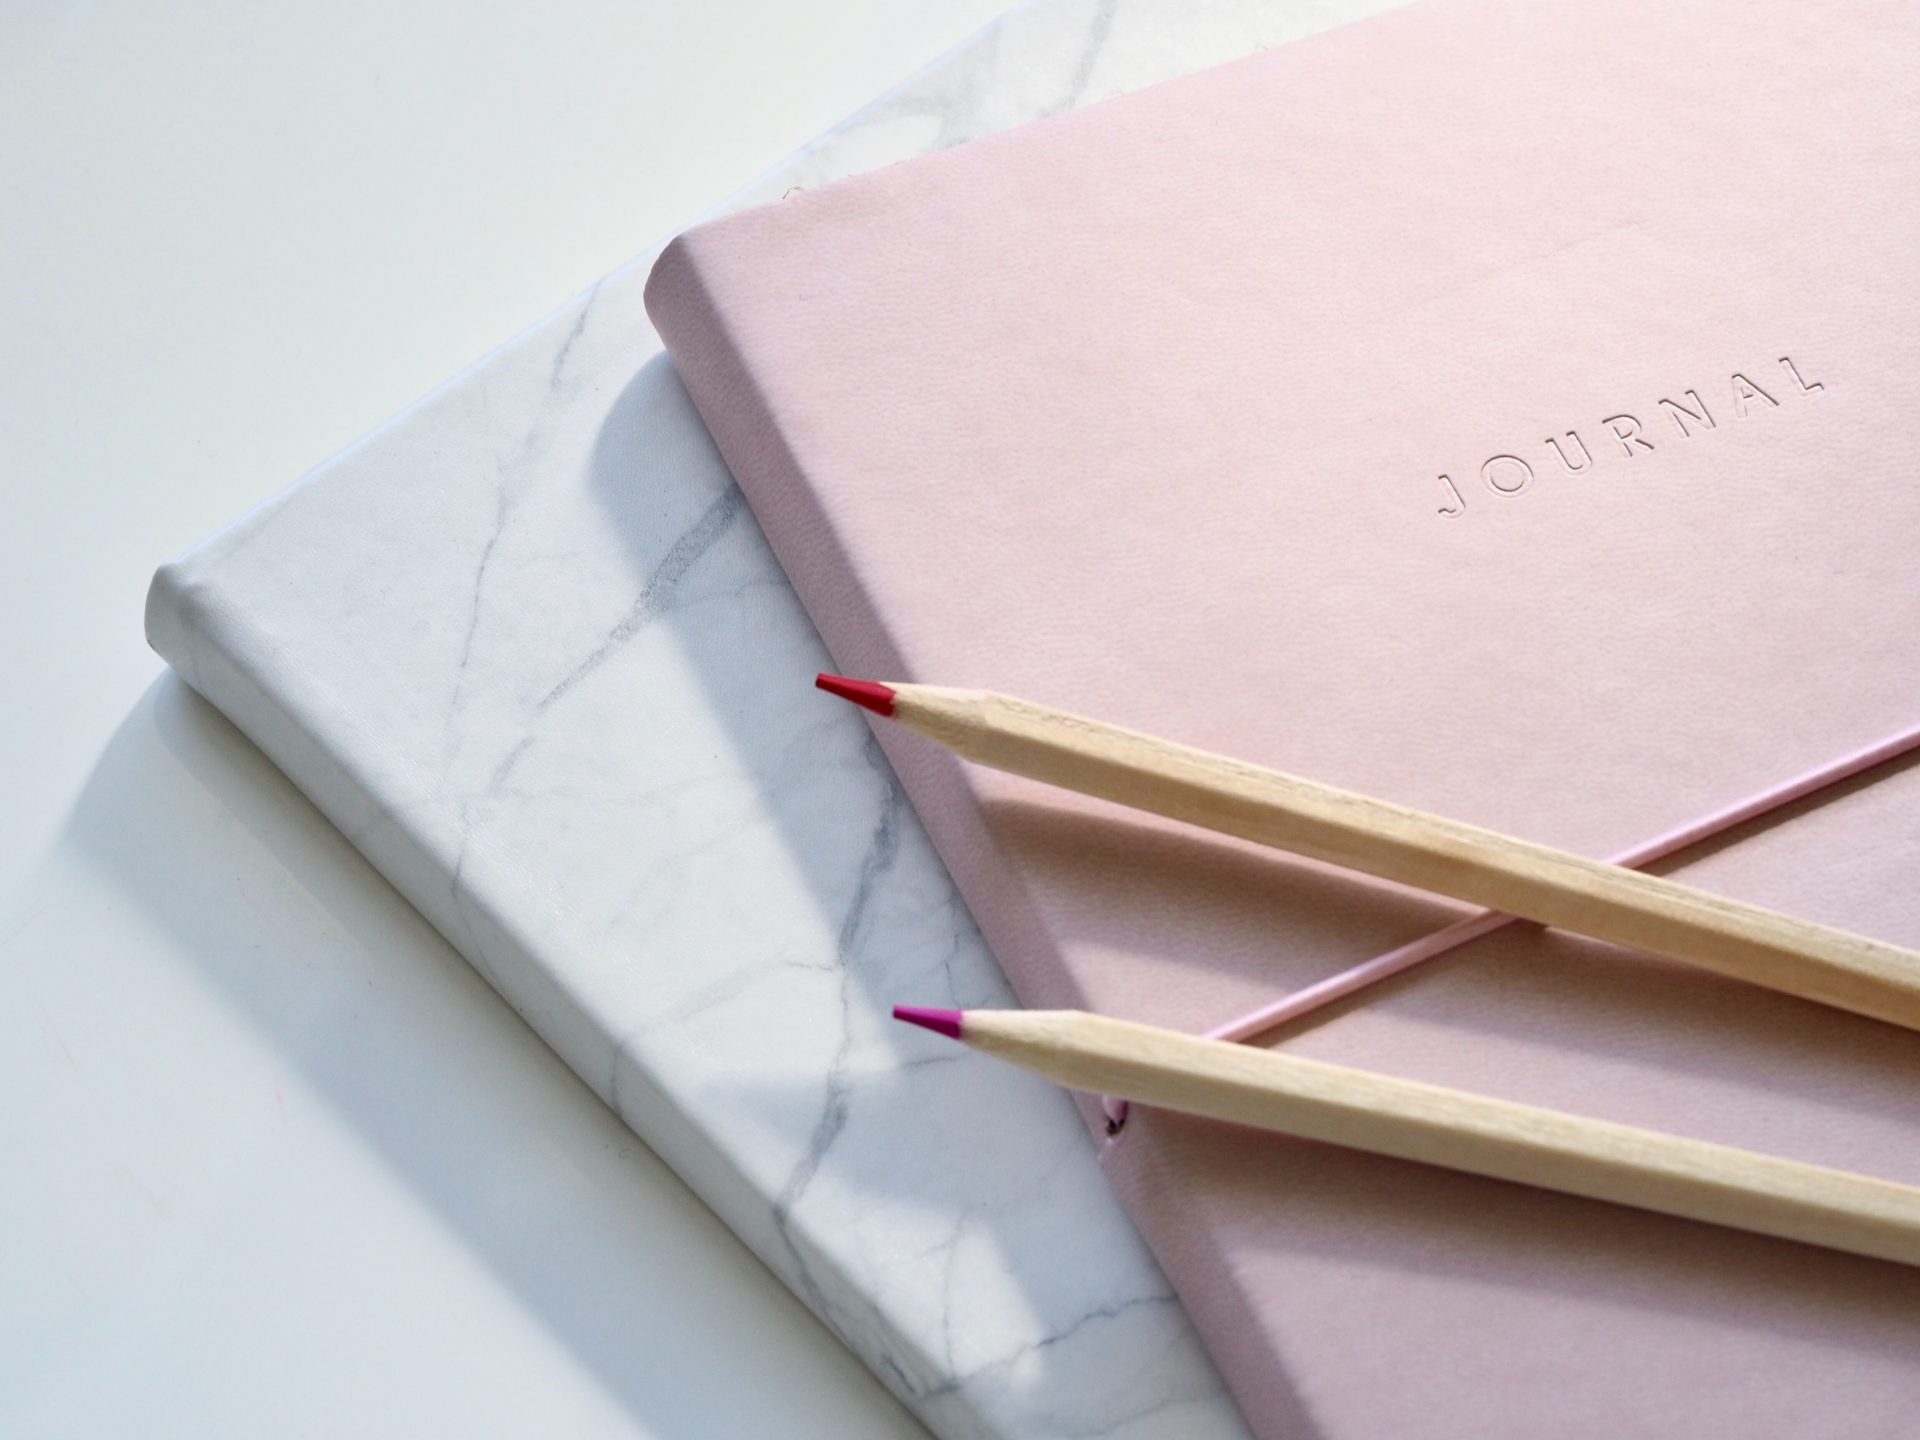 Two pencils are laying on a pink notebook.